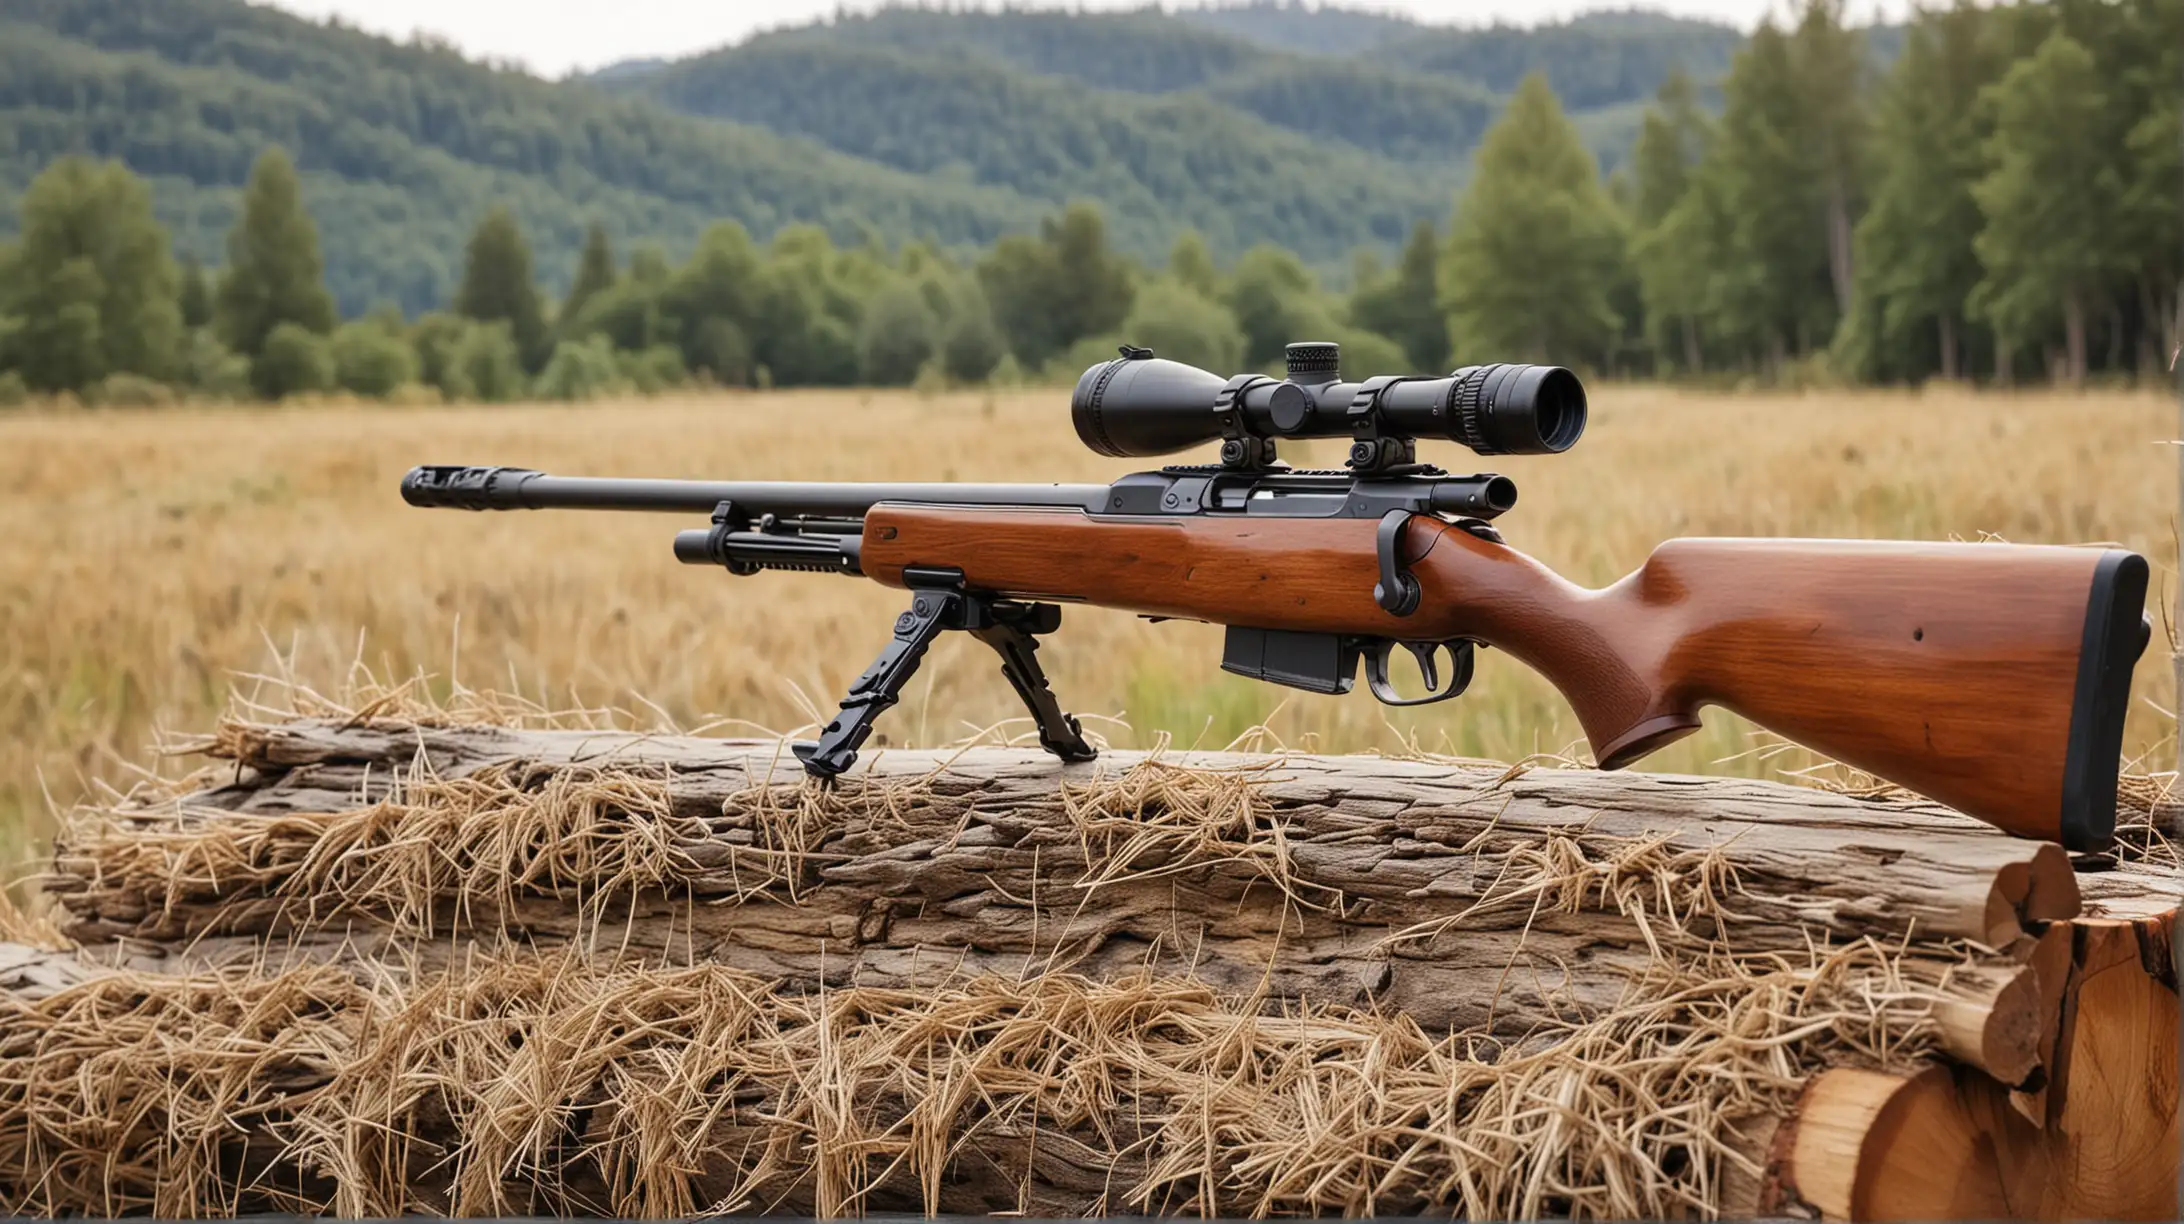 rifle on a log, hay blurry background